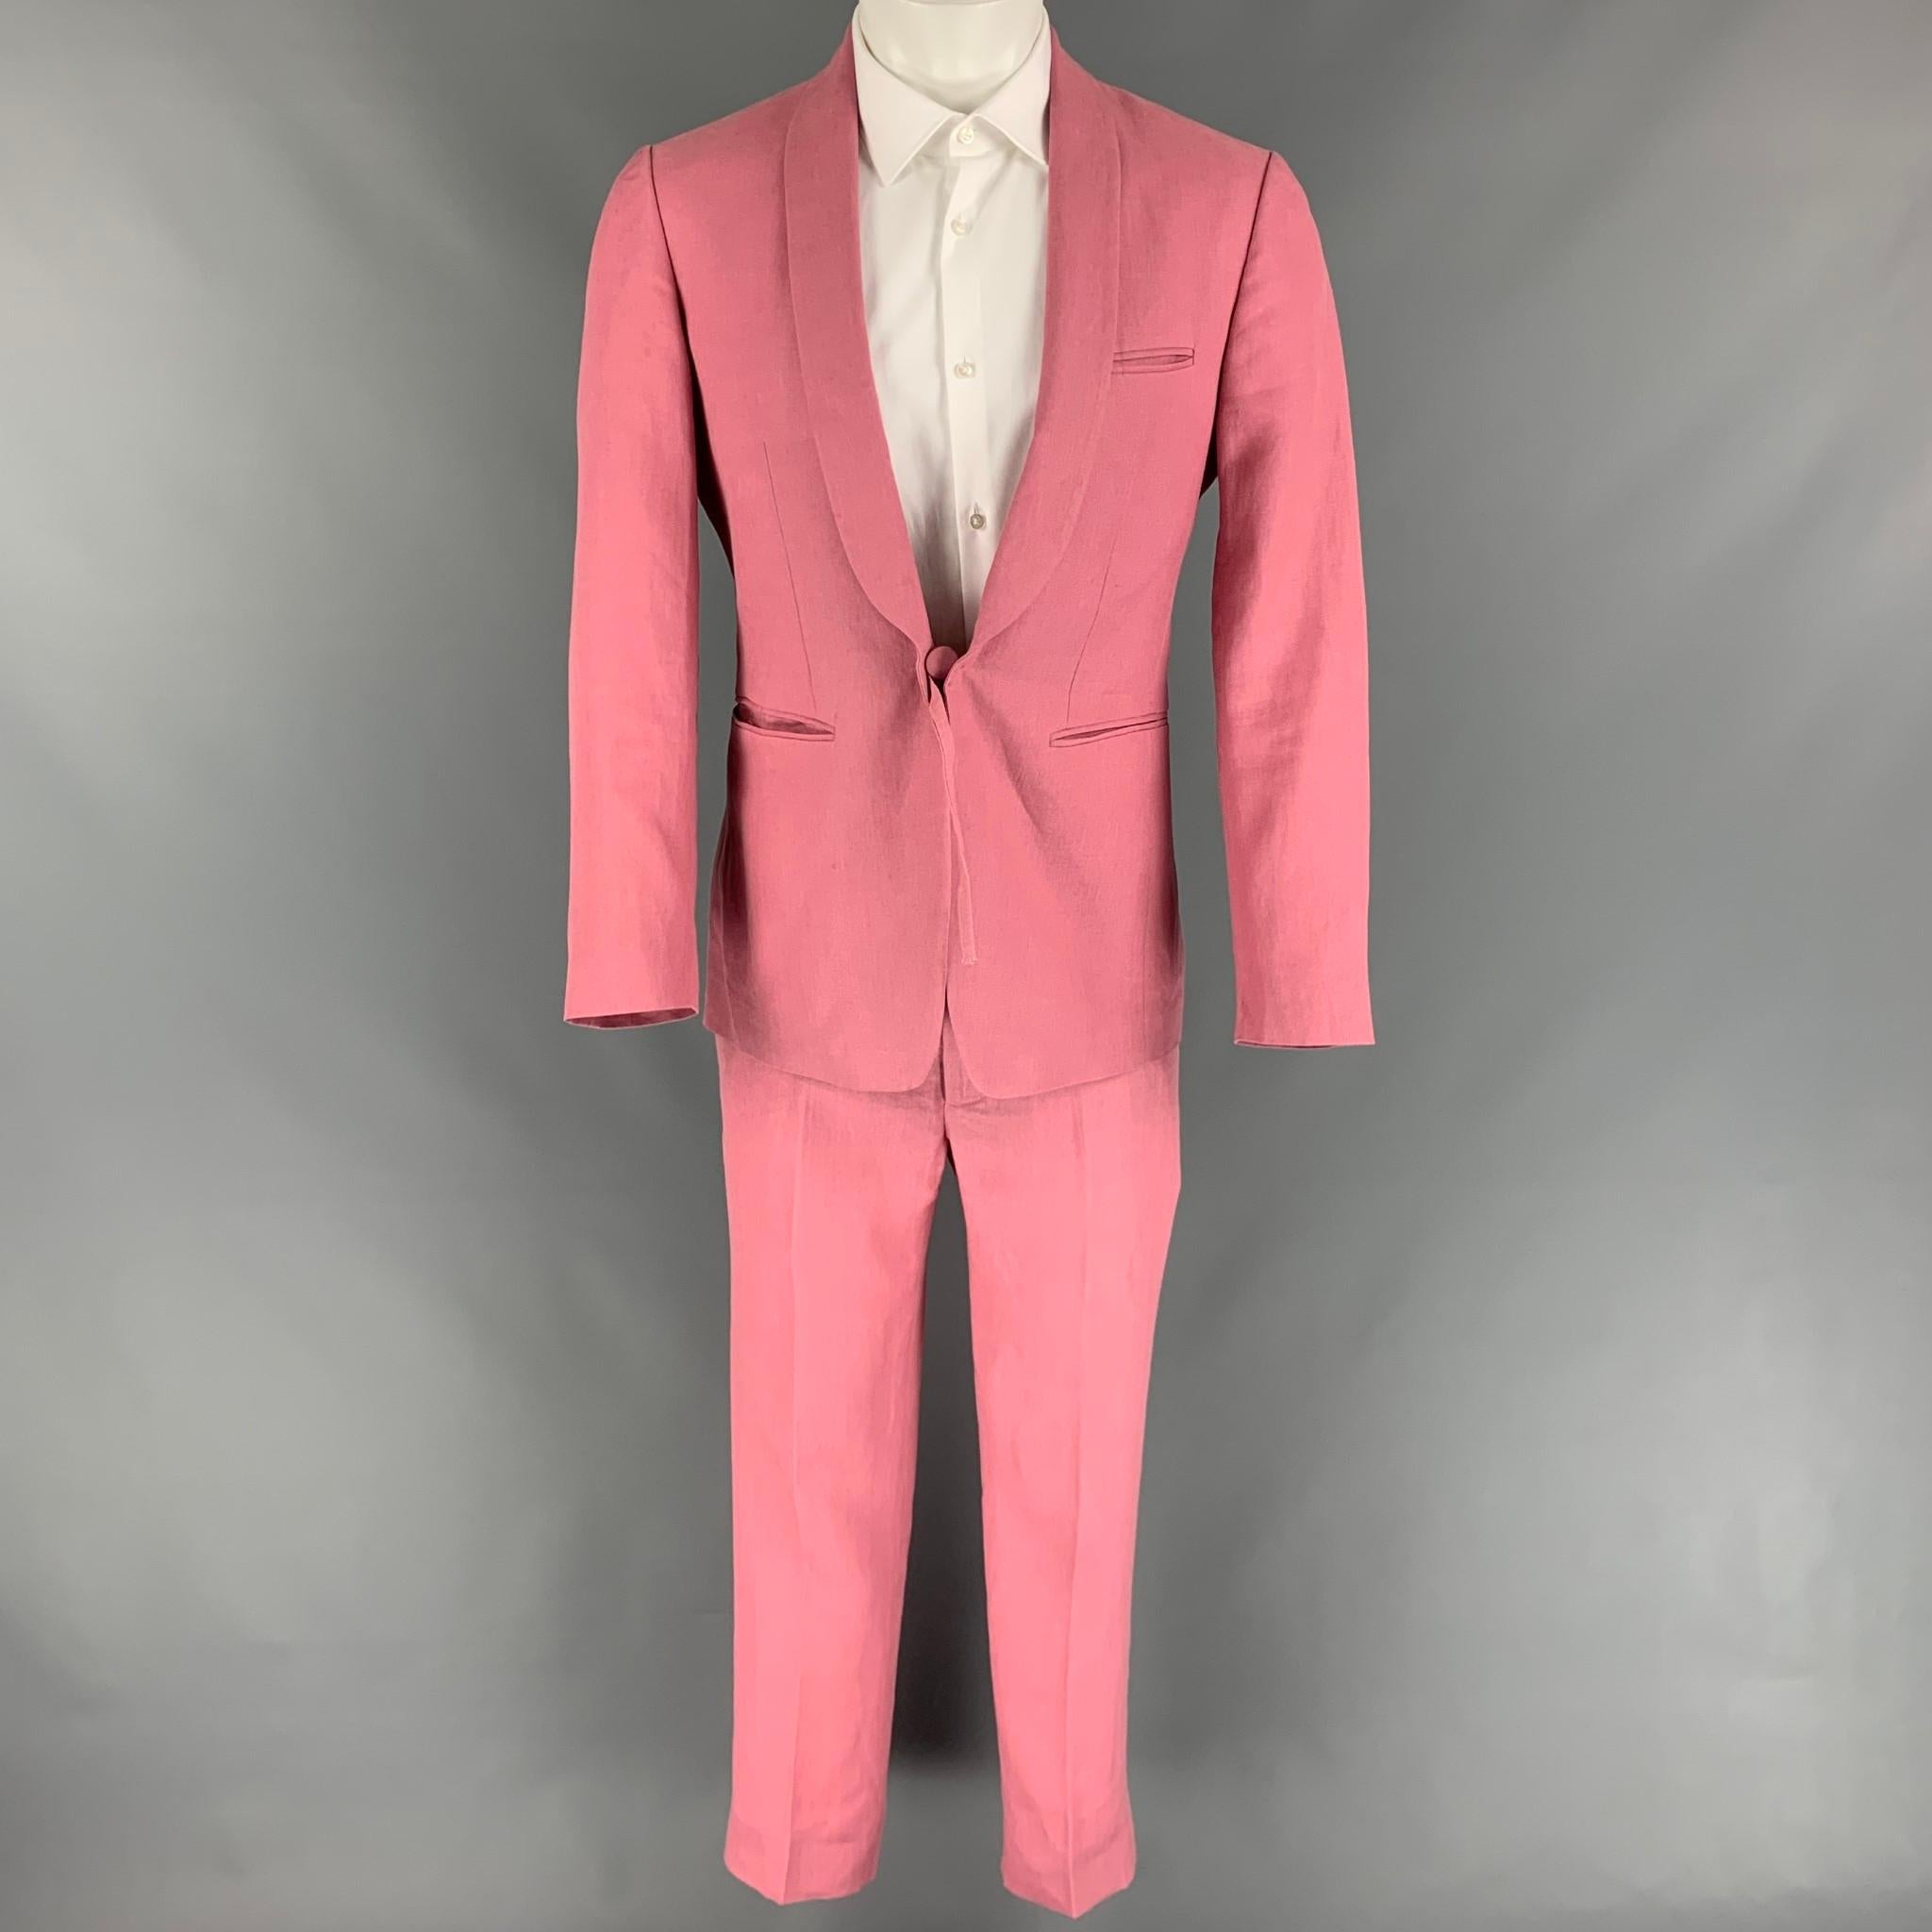 ETRO suit comes in a pink linen with a full liner and includes a single breasted, single button sport coat with a shawl collar and matching flat front trousers. Made in Italy. 

Very Good Pre-Owned Condition.
Marked: